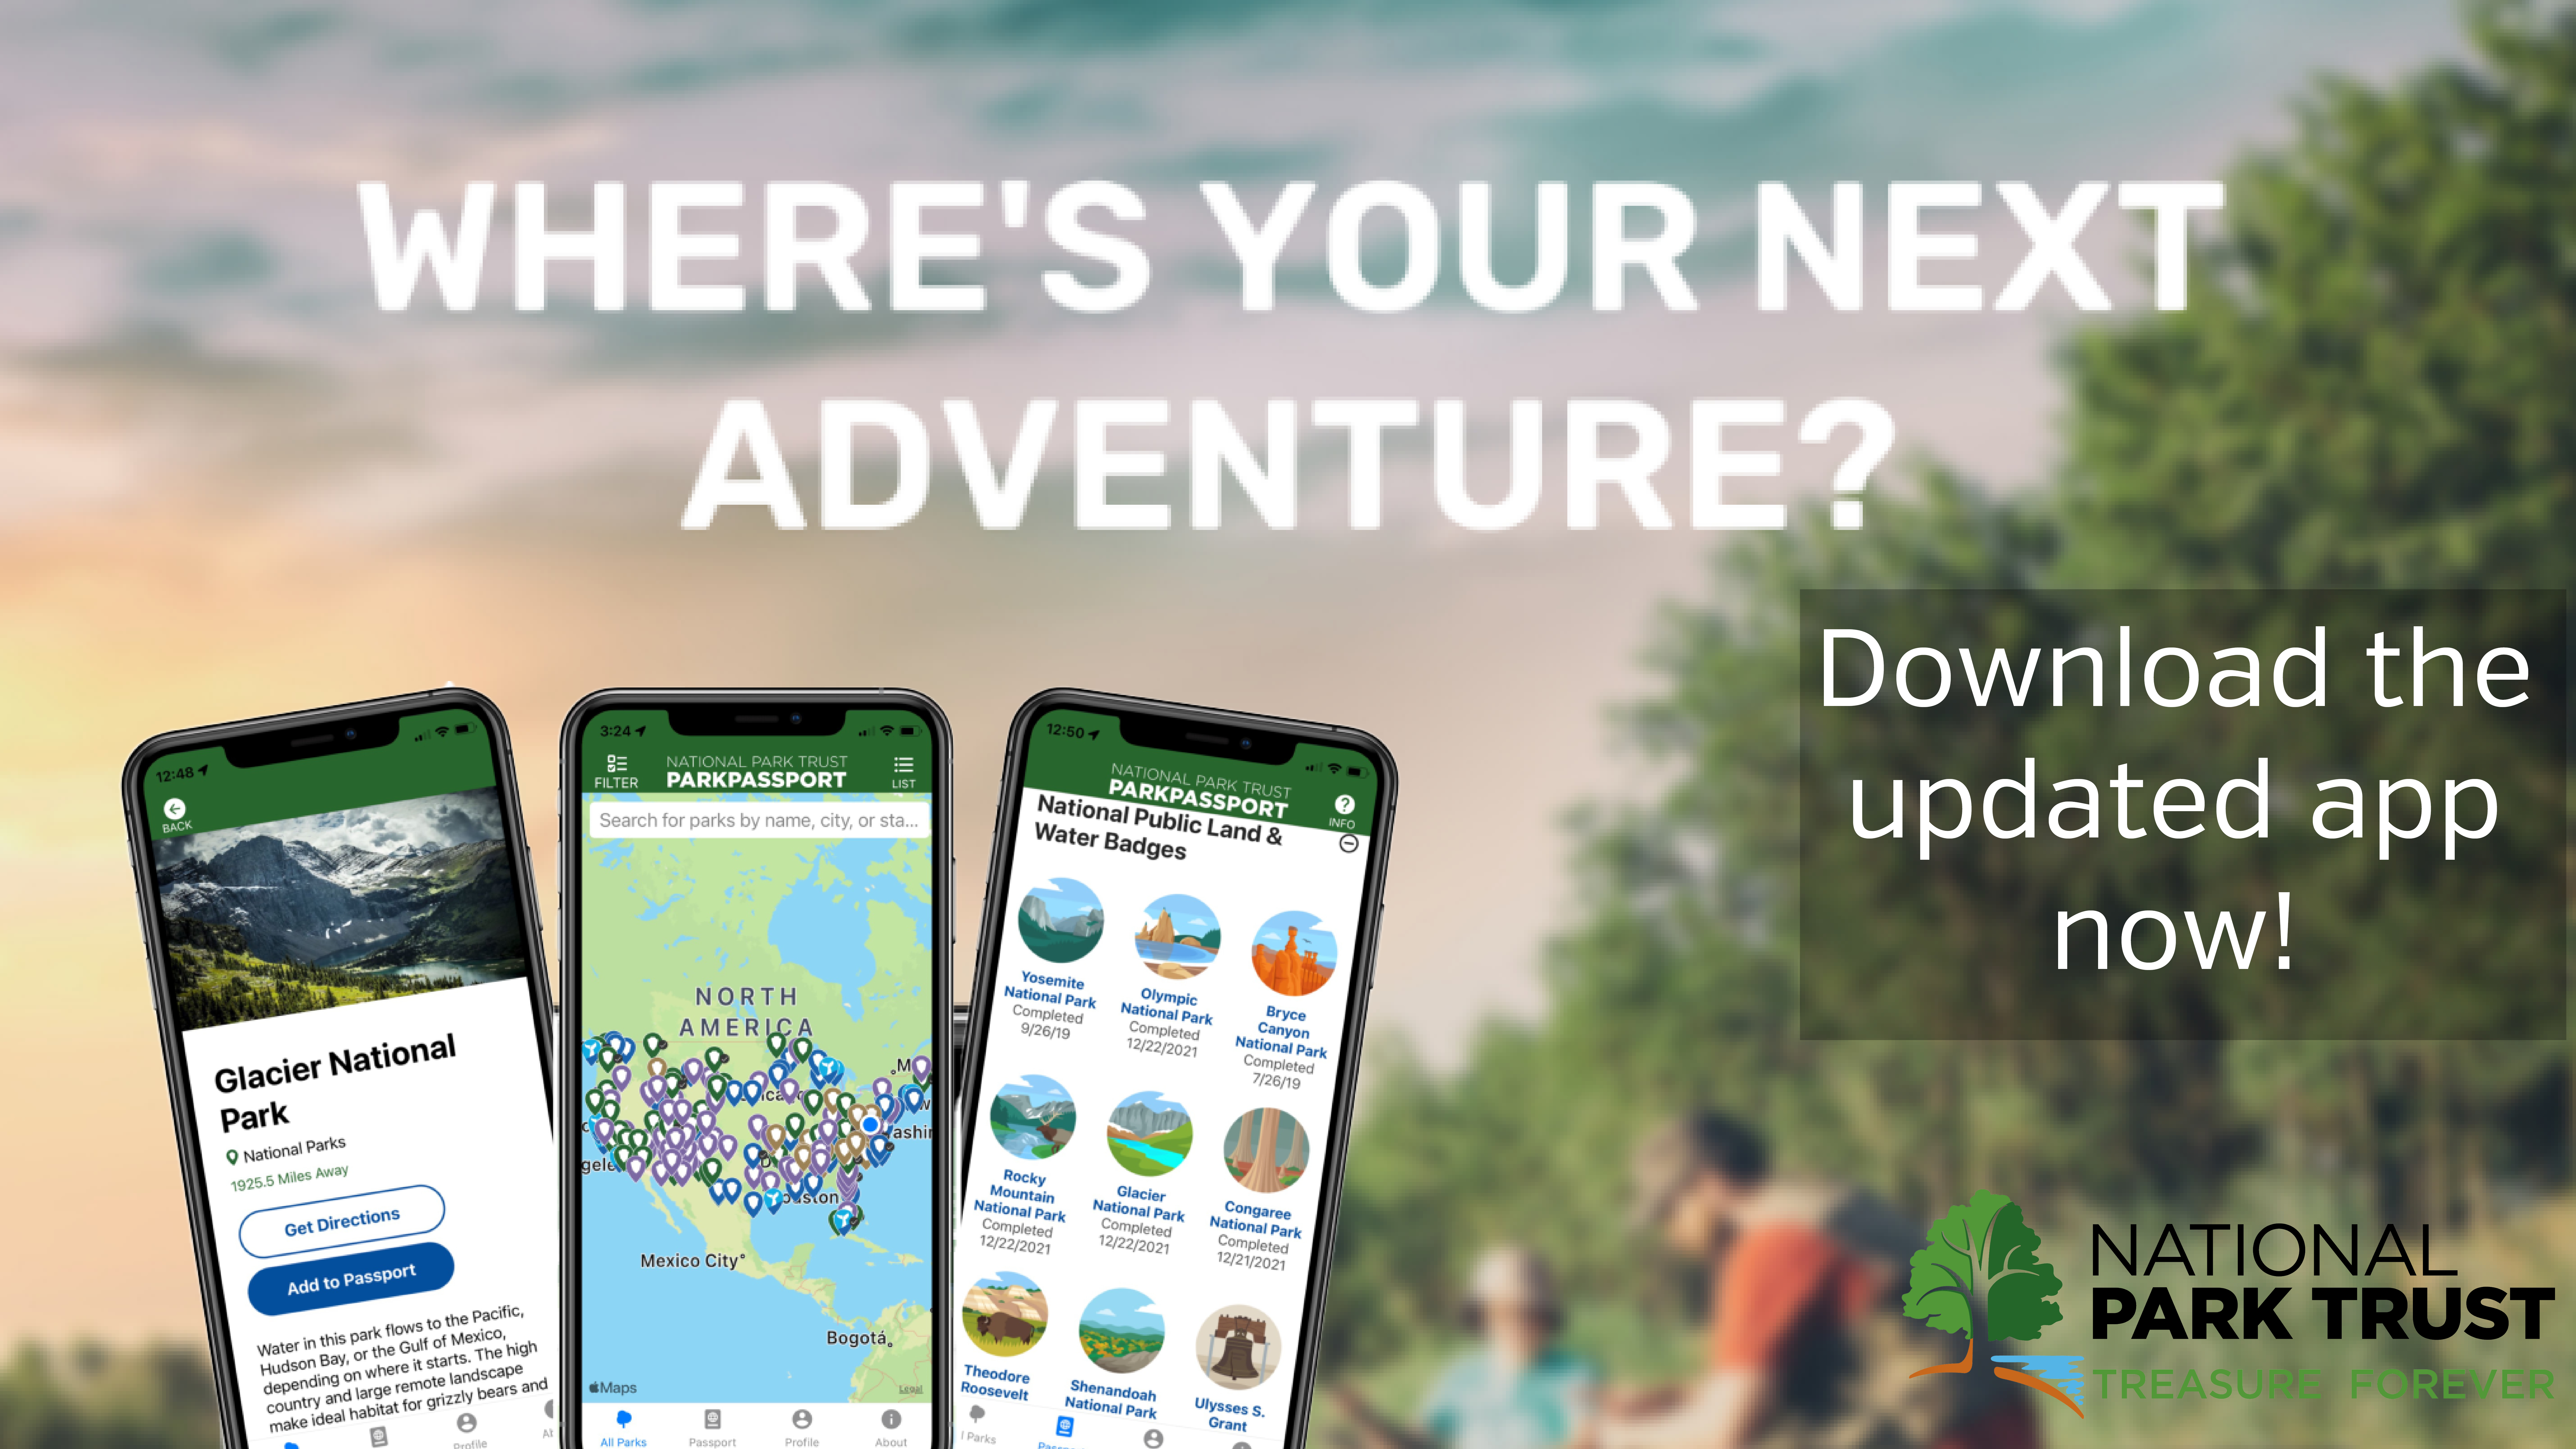 Web ad for the Park Passport app